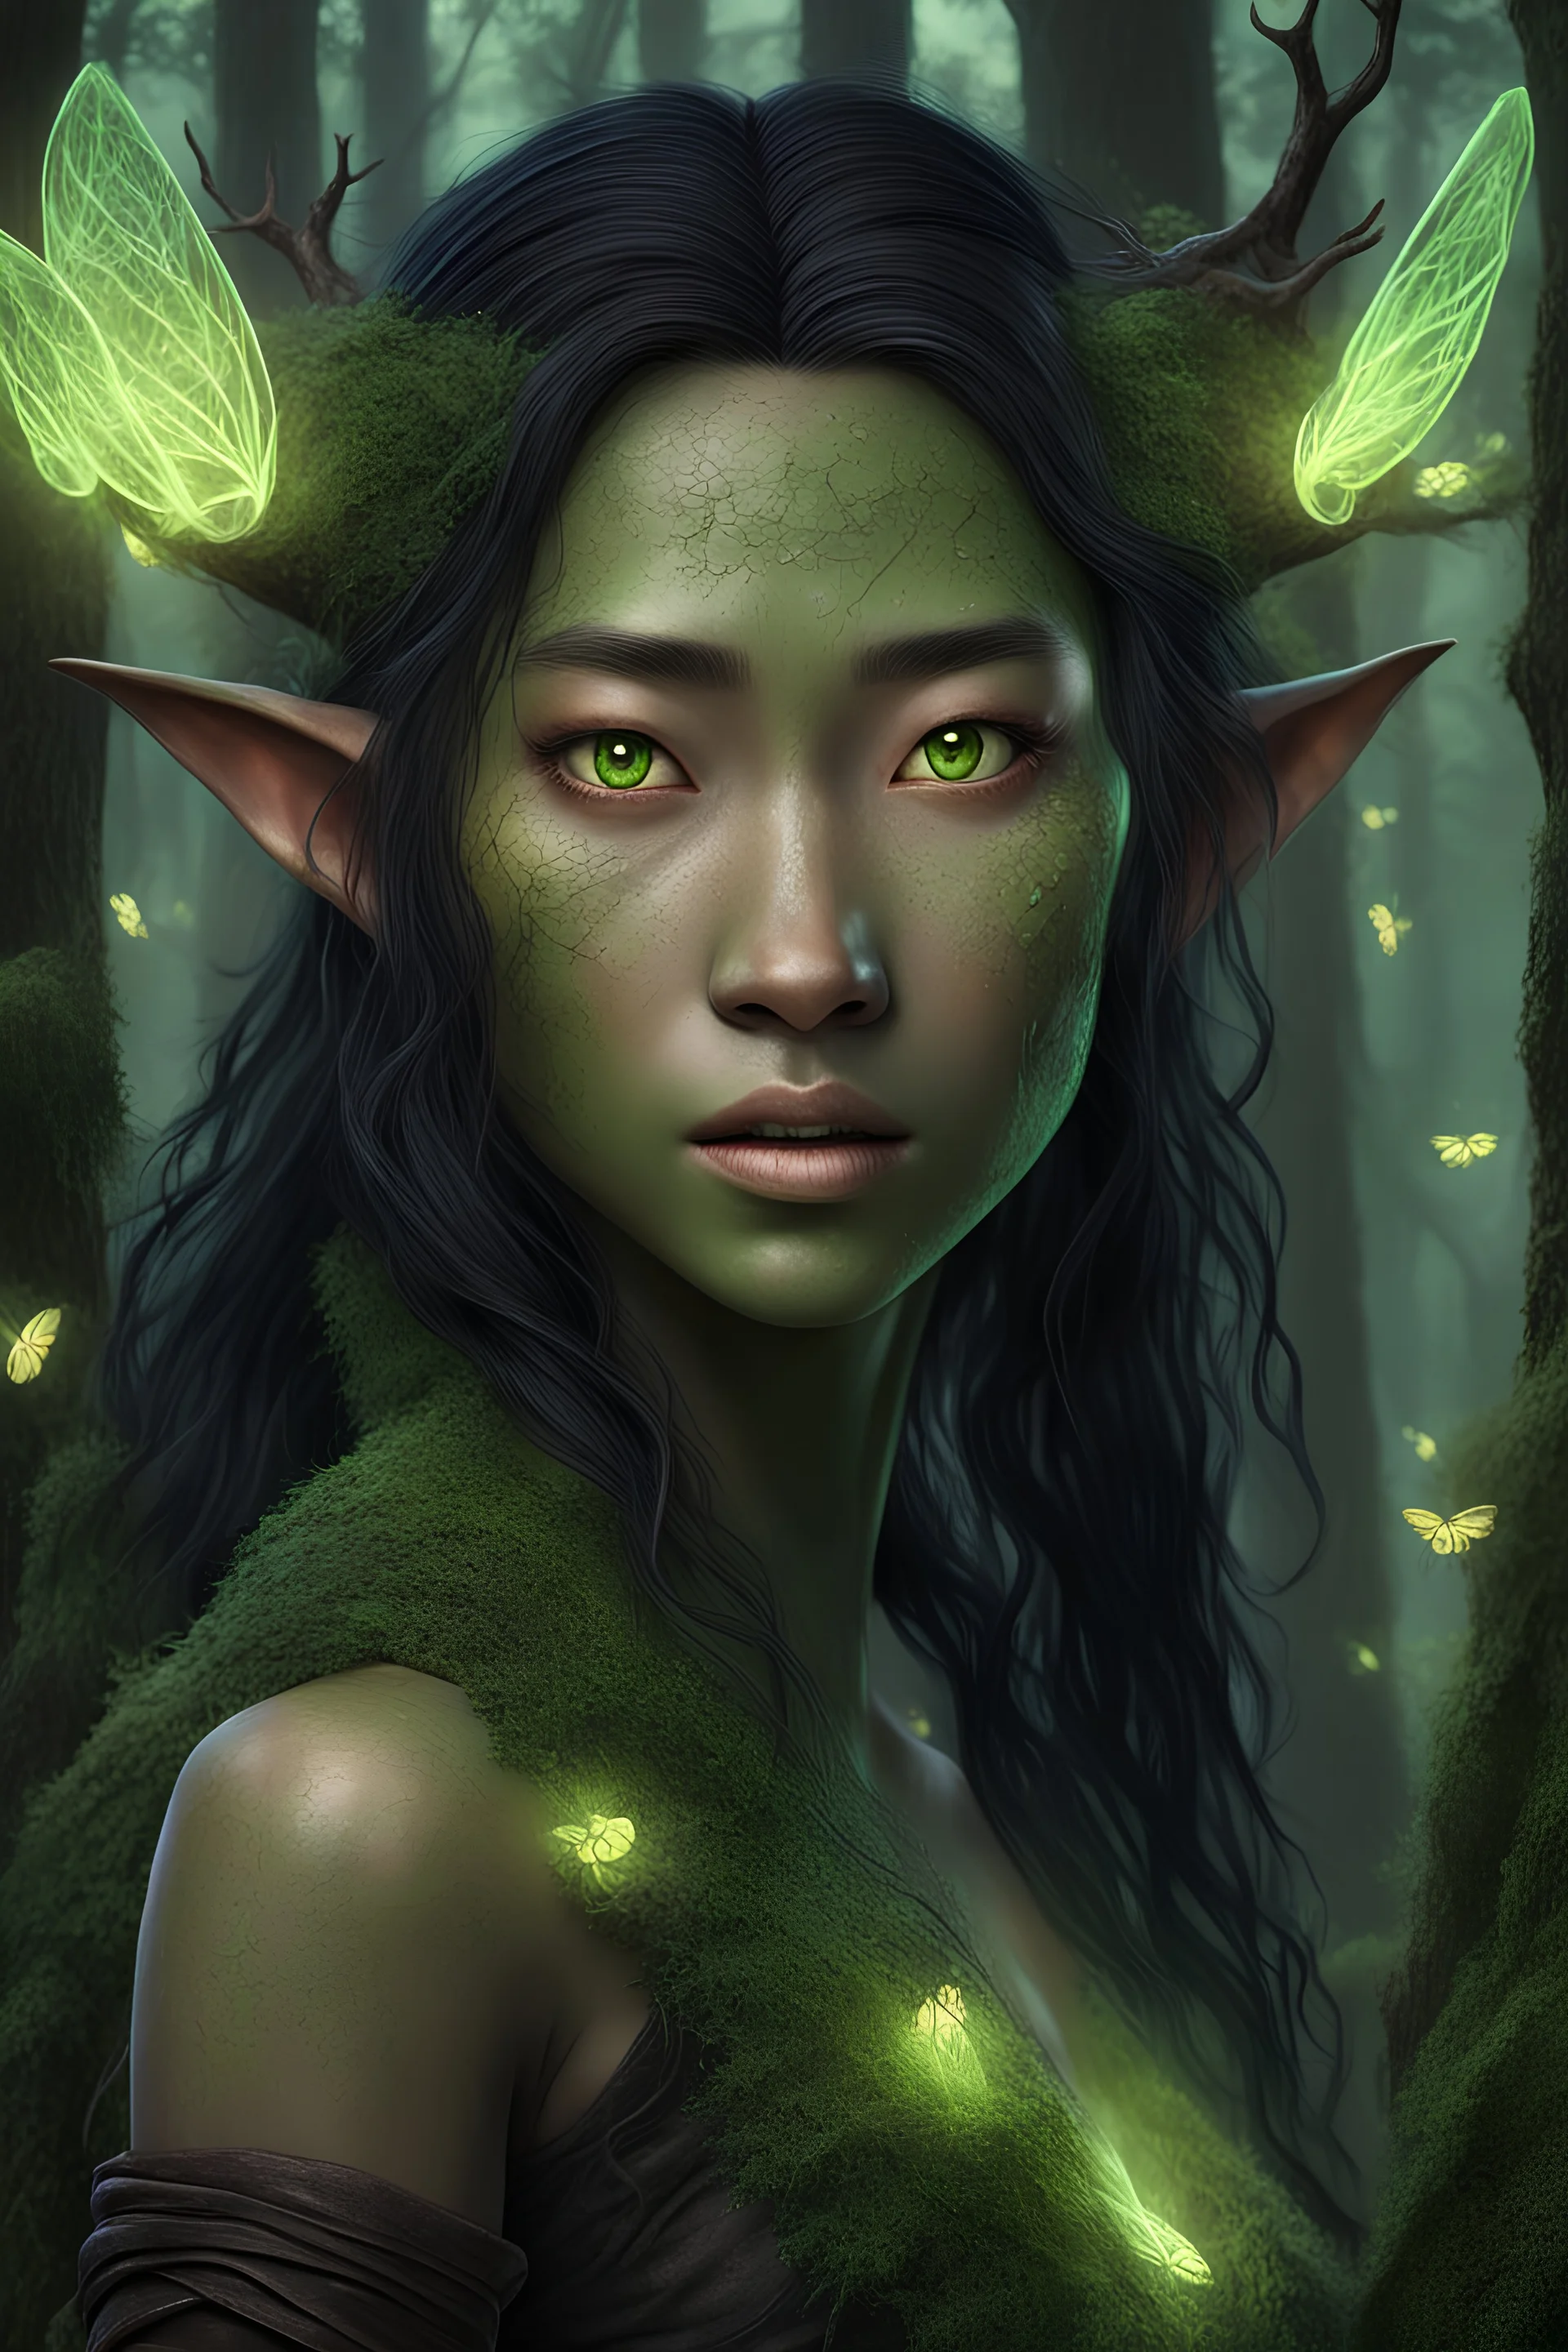 Druid, Elf, Mongolian face, Japanese face, green glowing eyes, black hair, bronze skin, mossy, natural, mystic, 3d Fantasy Art, detailed, realistic, shabby, black dress, majestic, forest, fireflies, woody